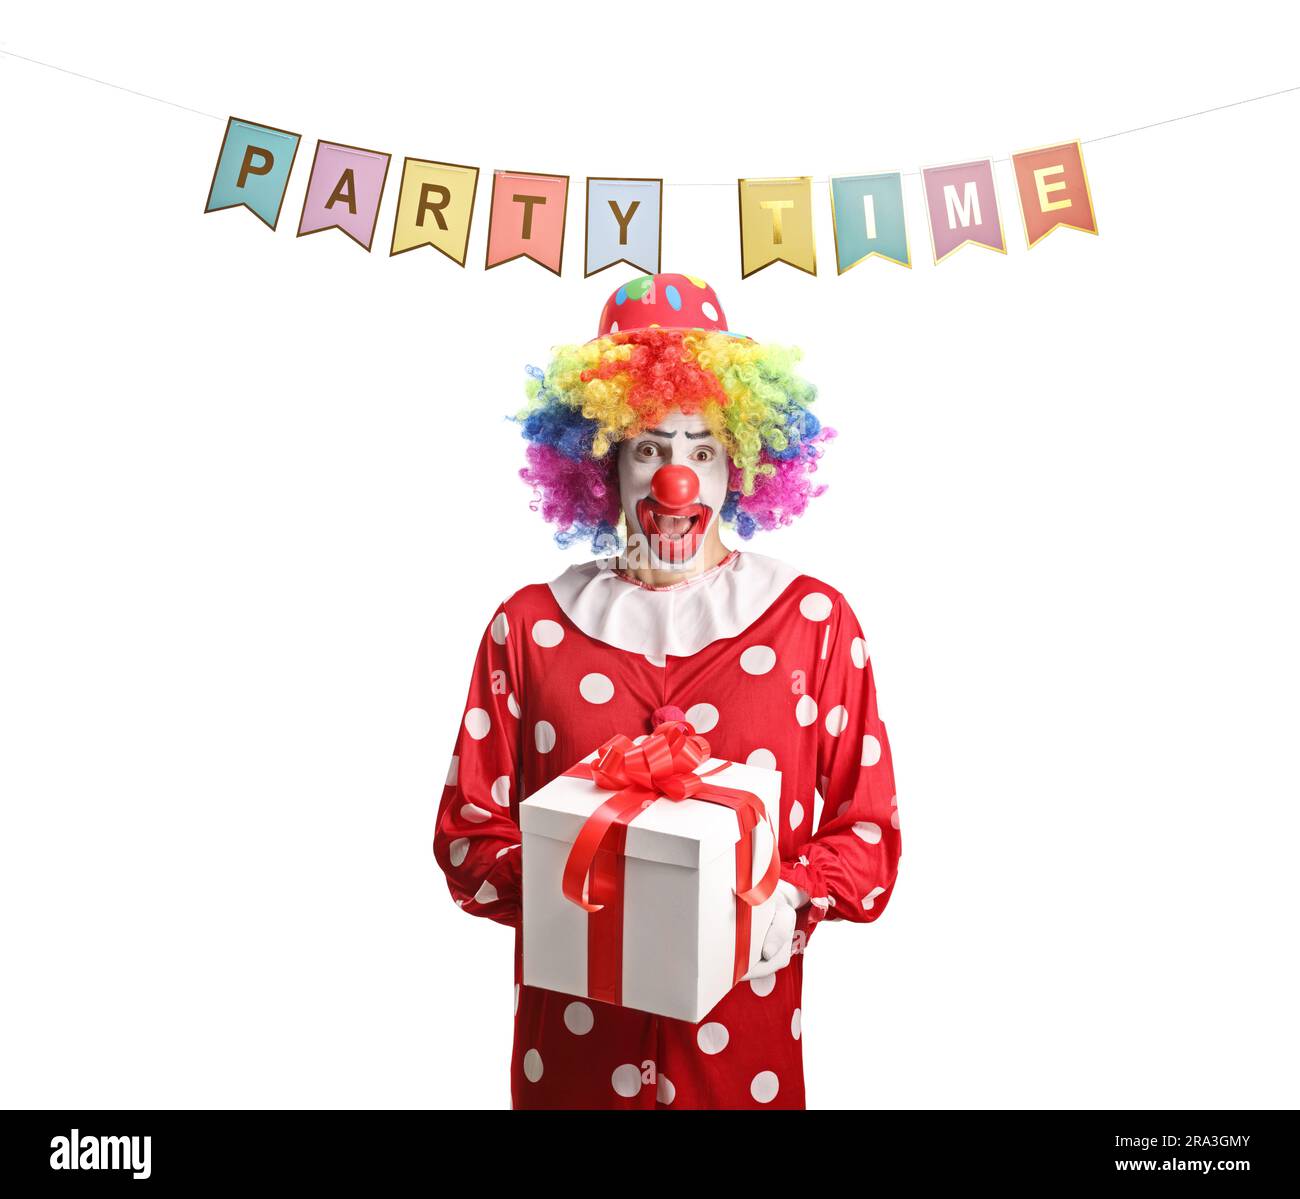 Clown in a red costume under party flags holding a present box isolated on white background Stock Photo